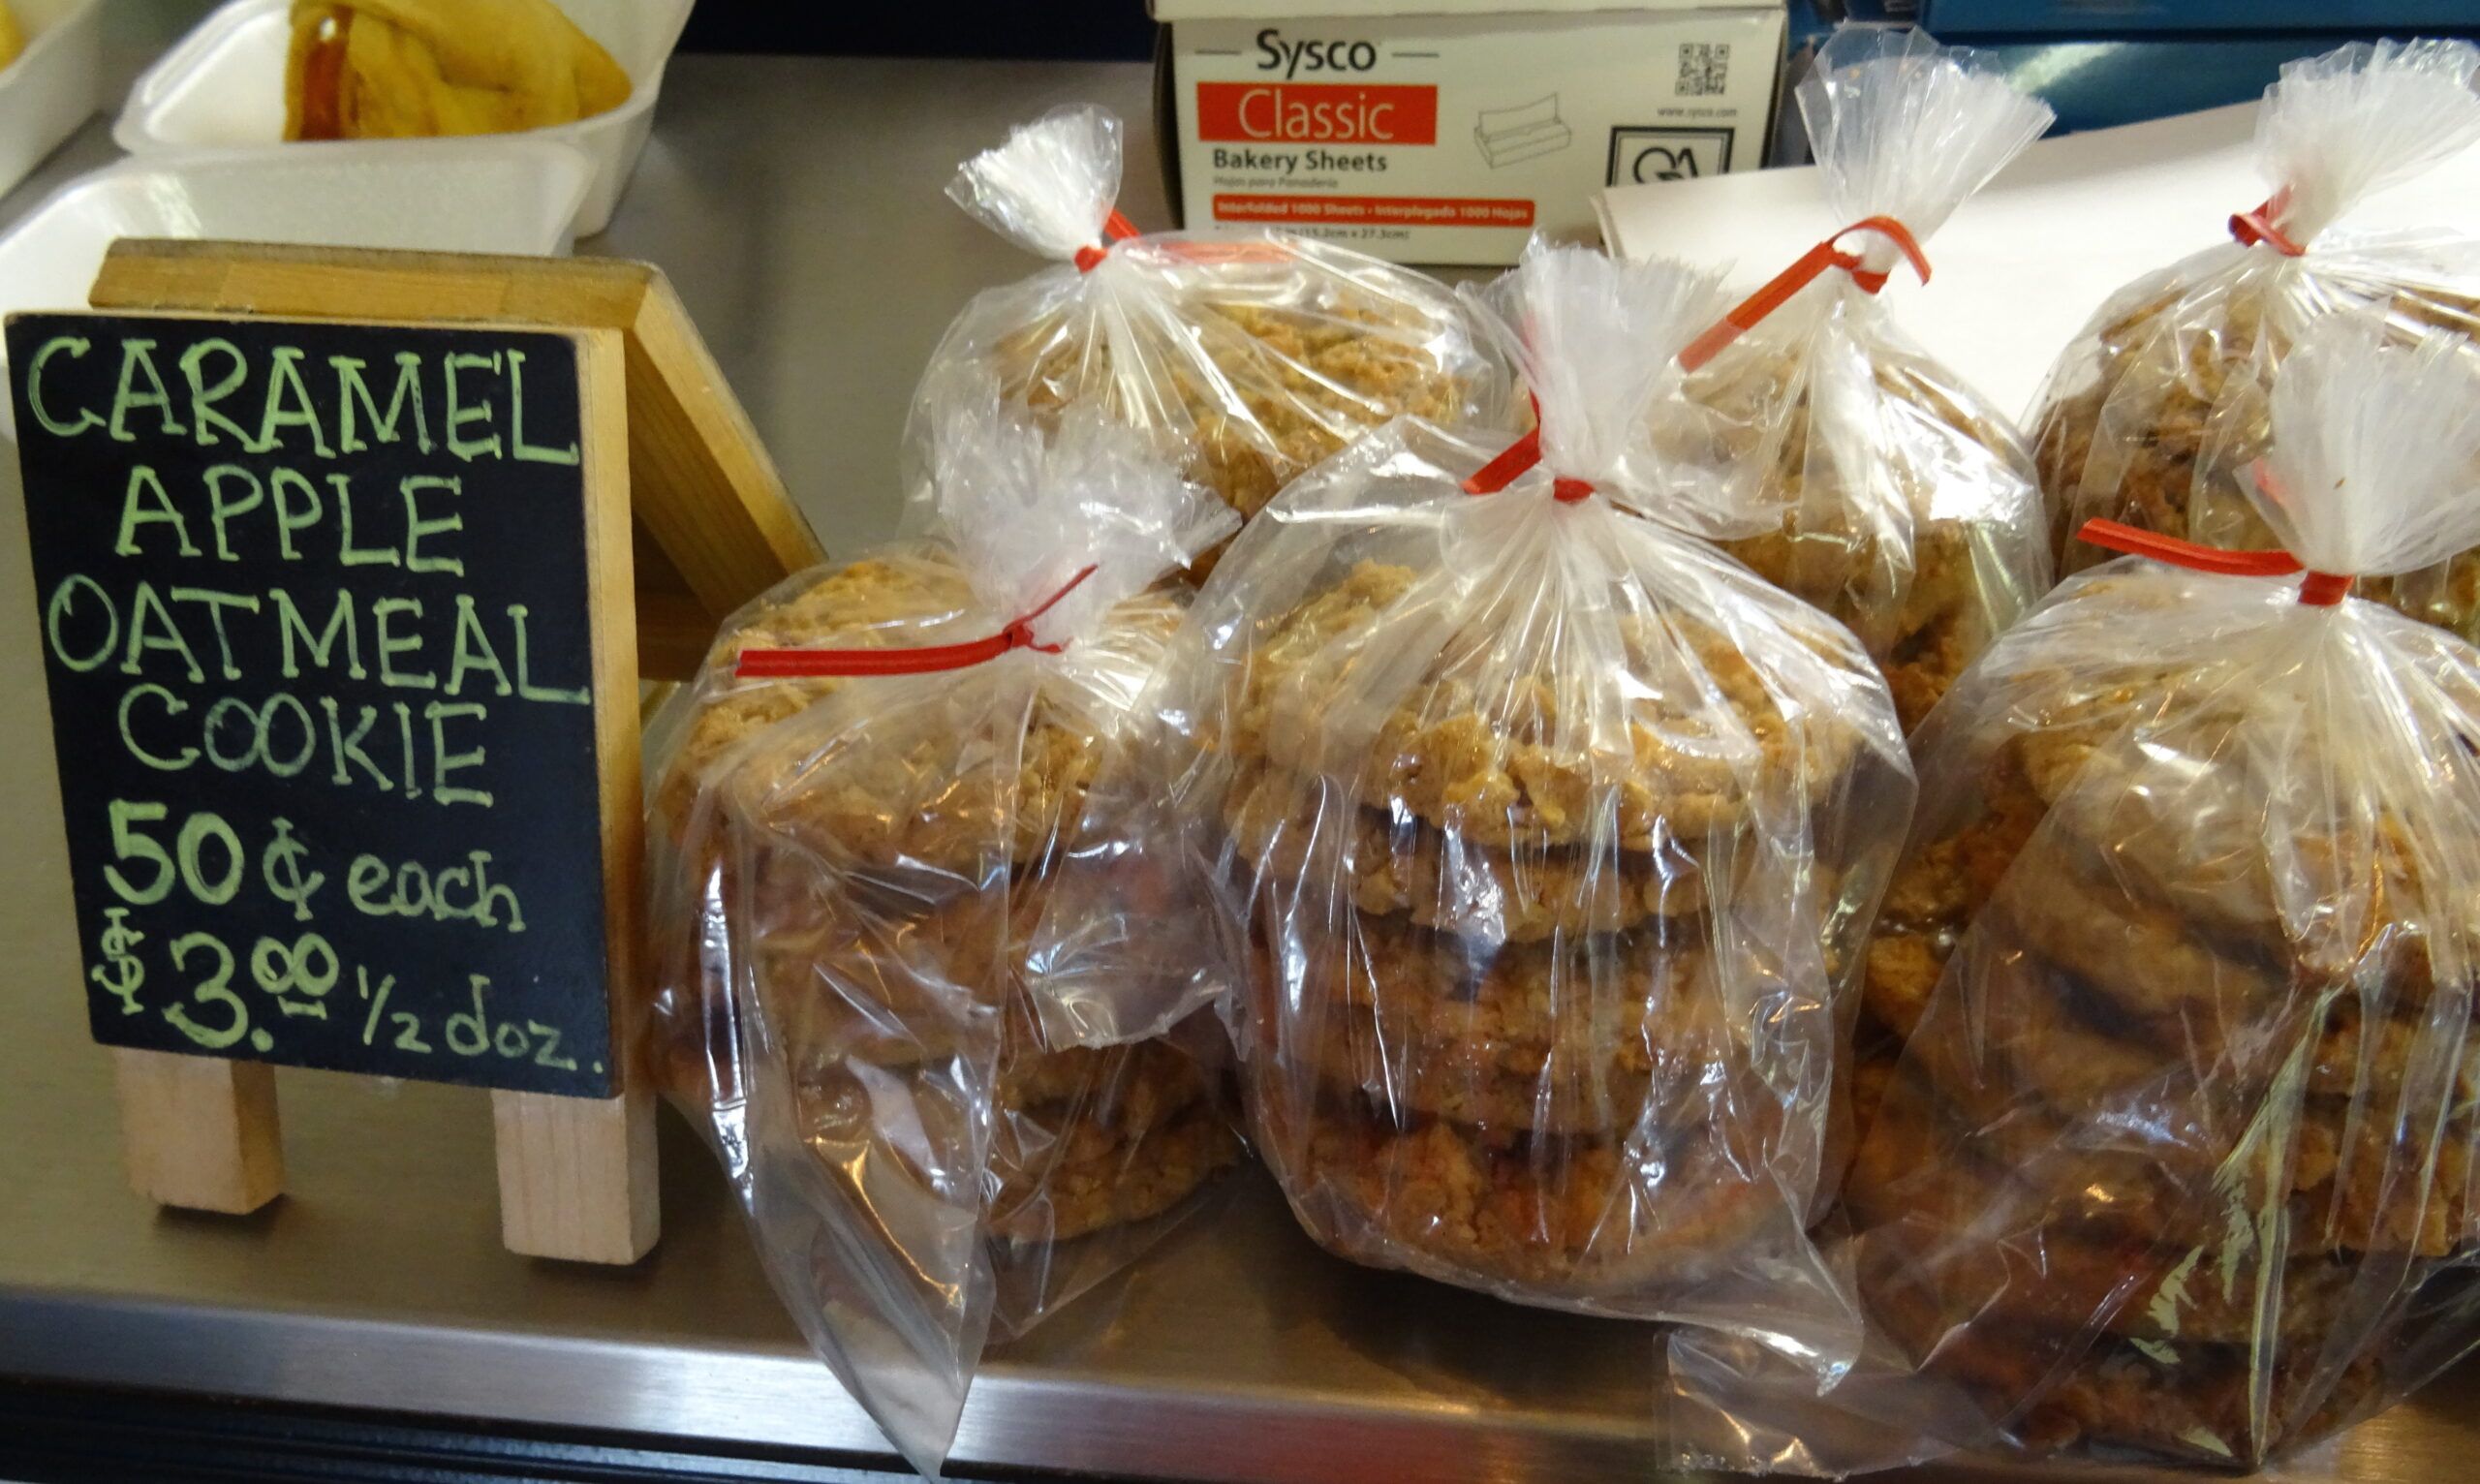 The bakery featured all kinds of delicious apple cookies.